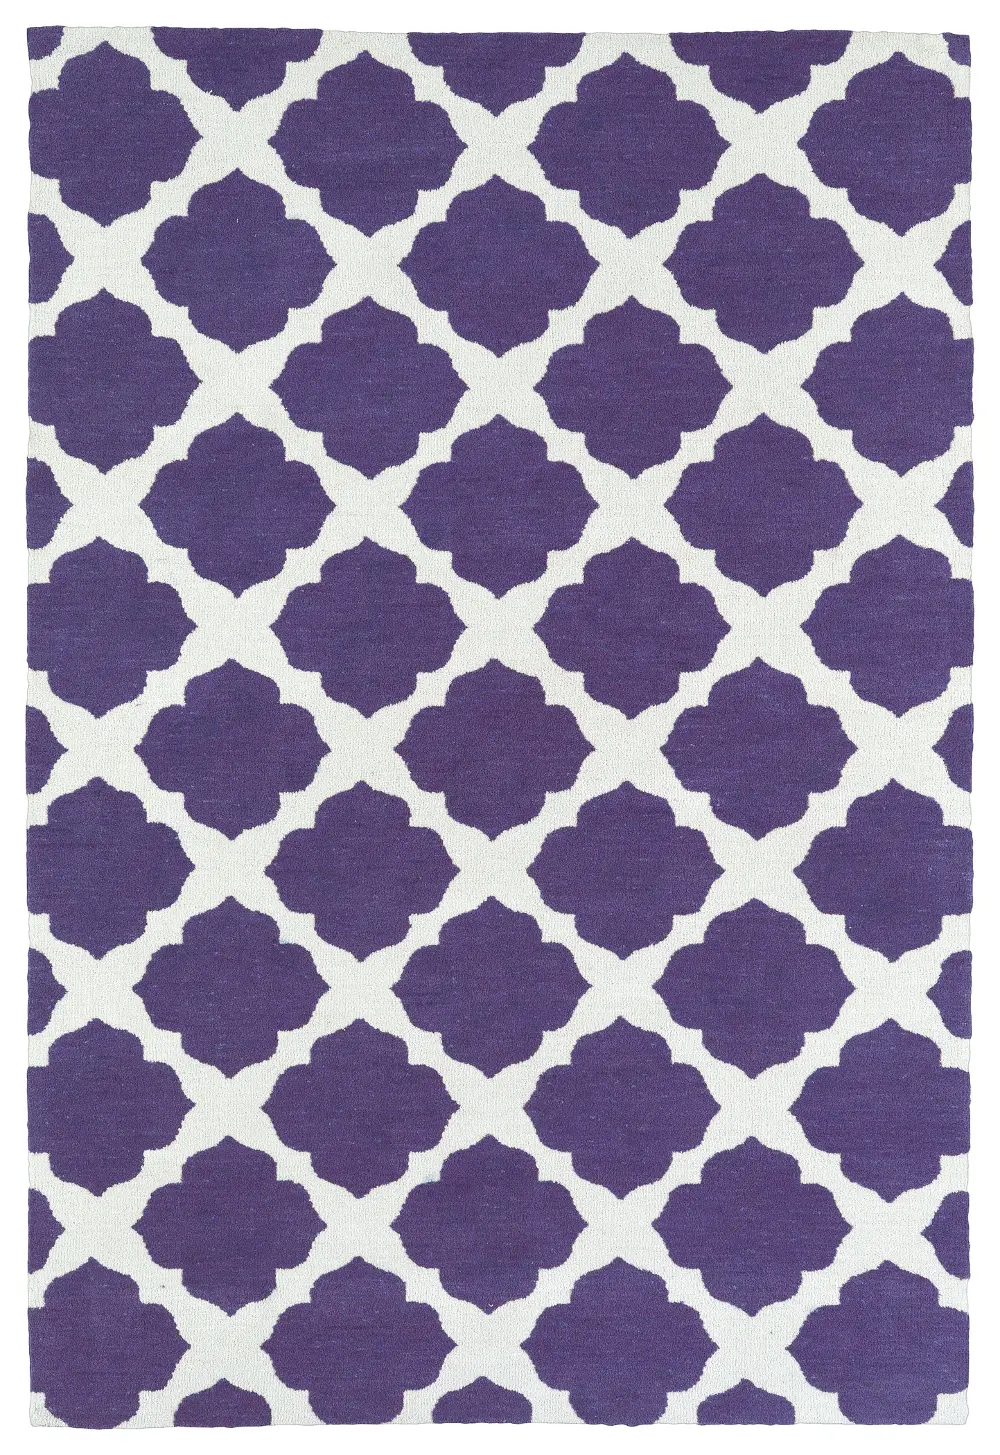 4 x 6 Small Purple and Ivory Area Rug - Lily & Liam-1